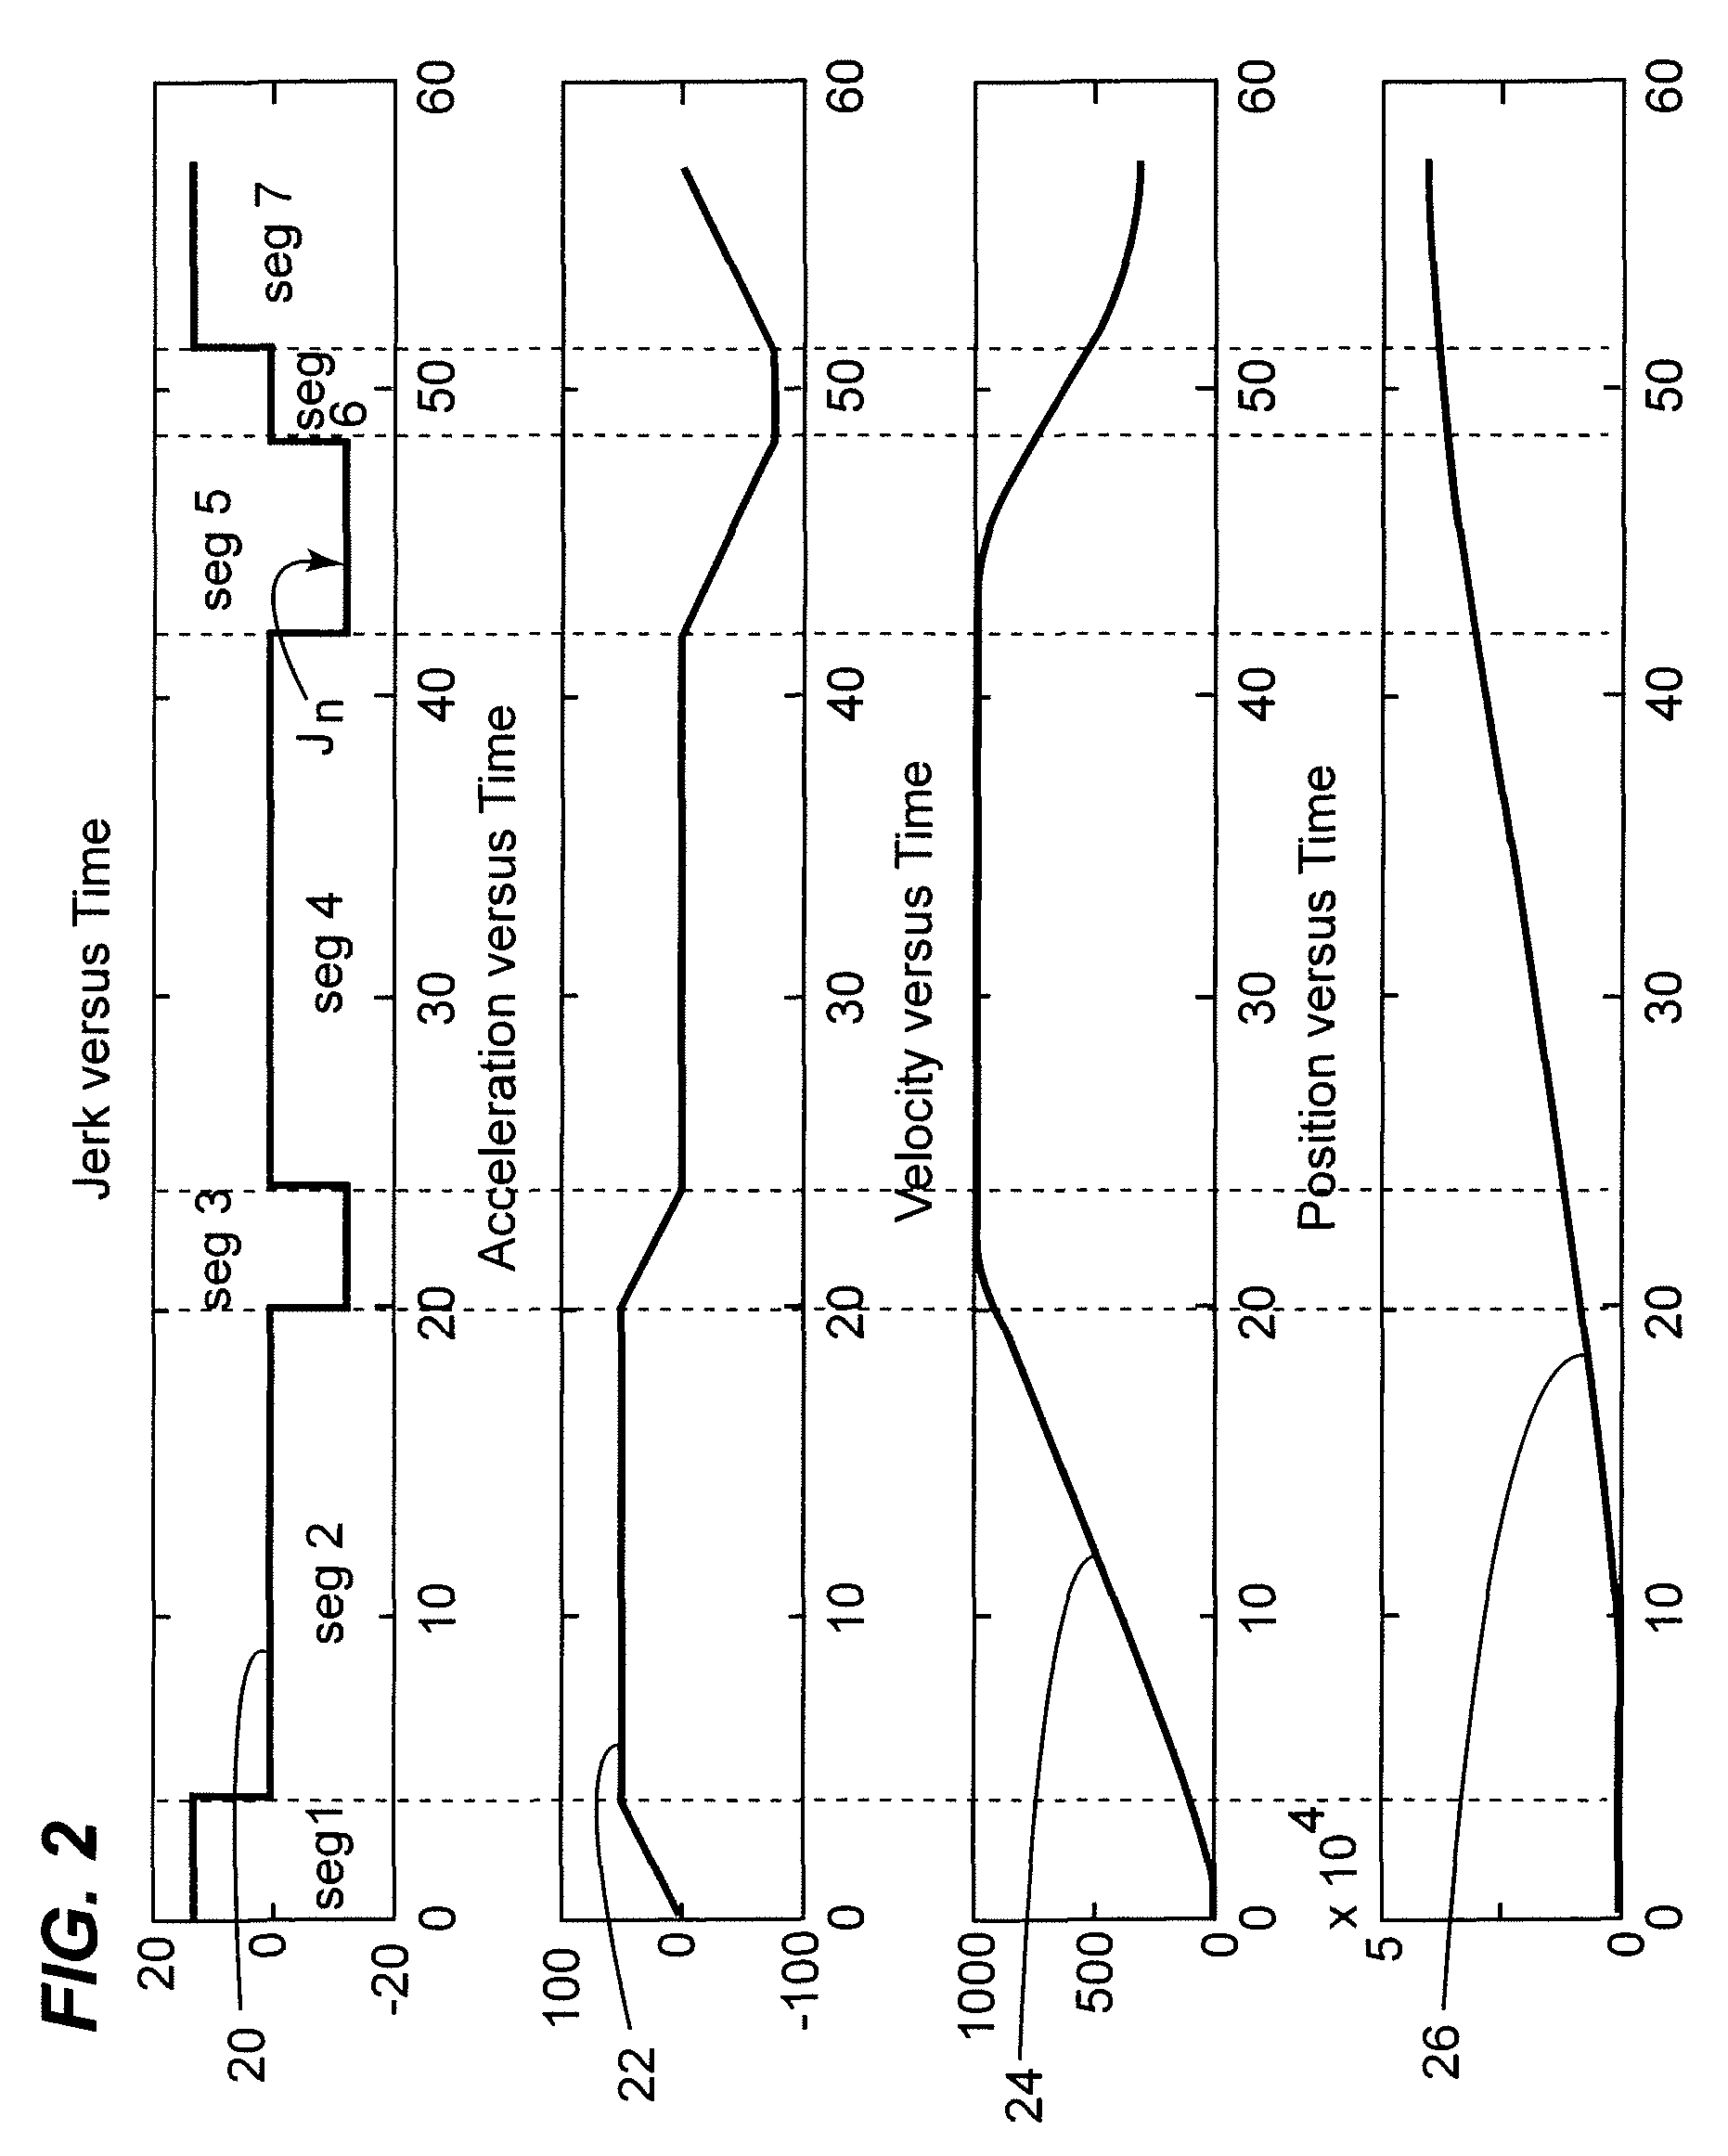 System and method for jerk limited trajectory planning for a path planner